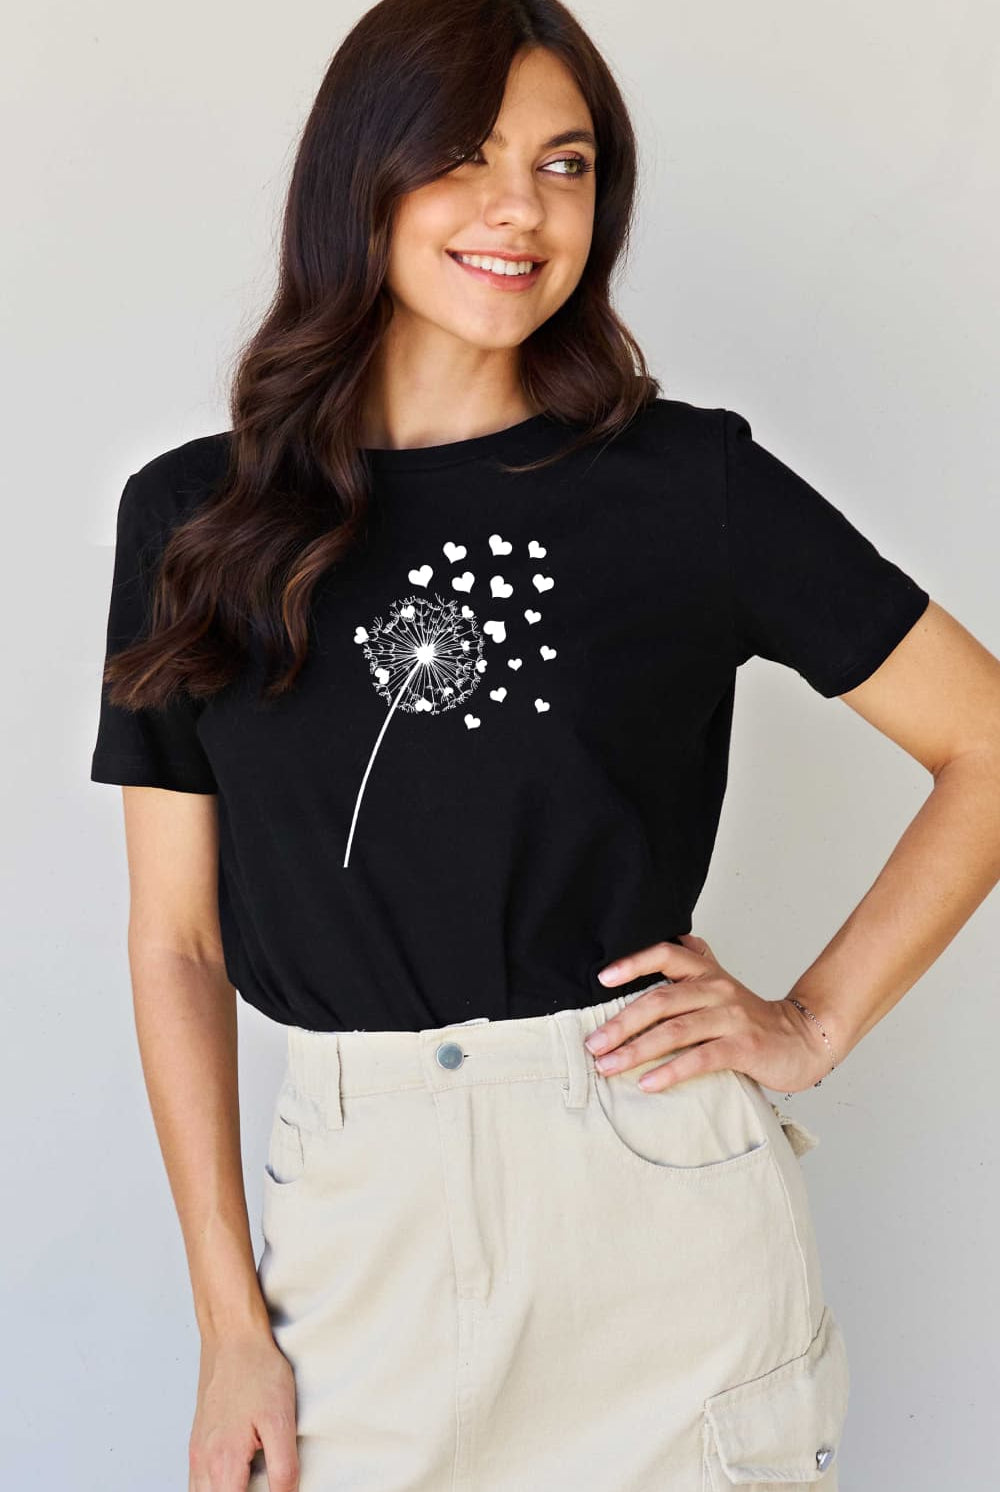 Black Simply Love Full Size Dandelion Heart Graphic Cotton T-Shirt Graphic Tees